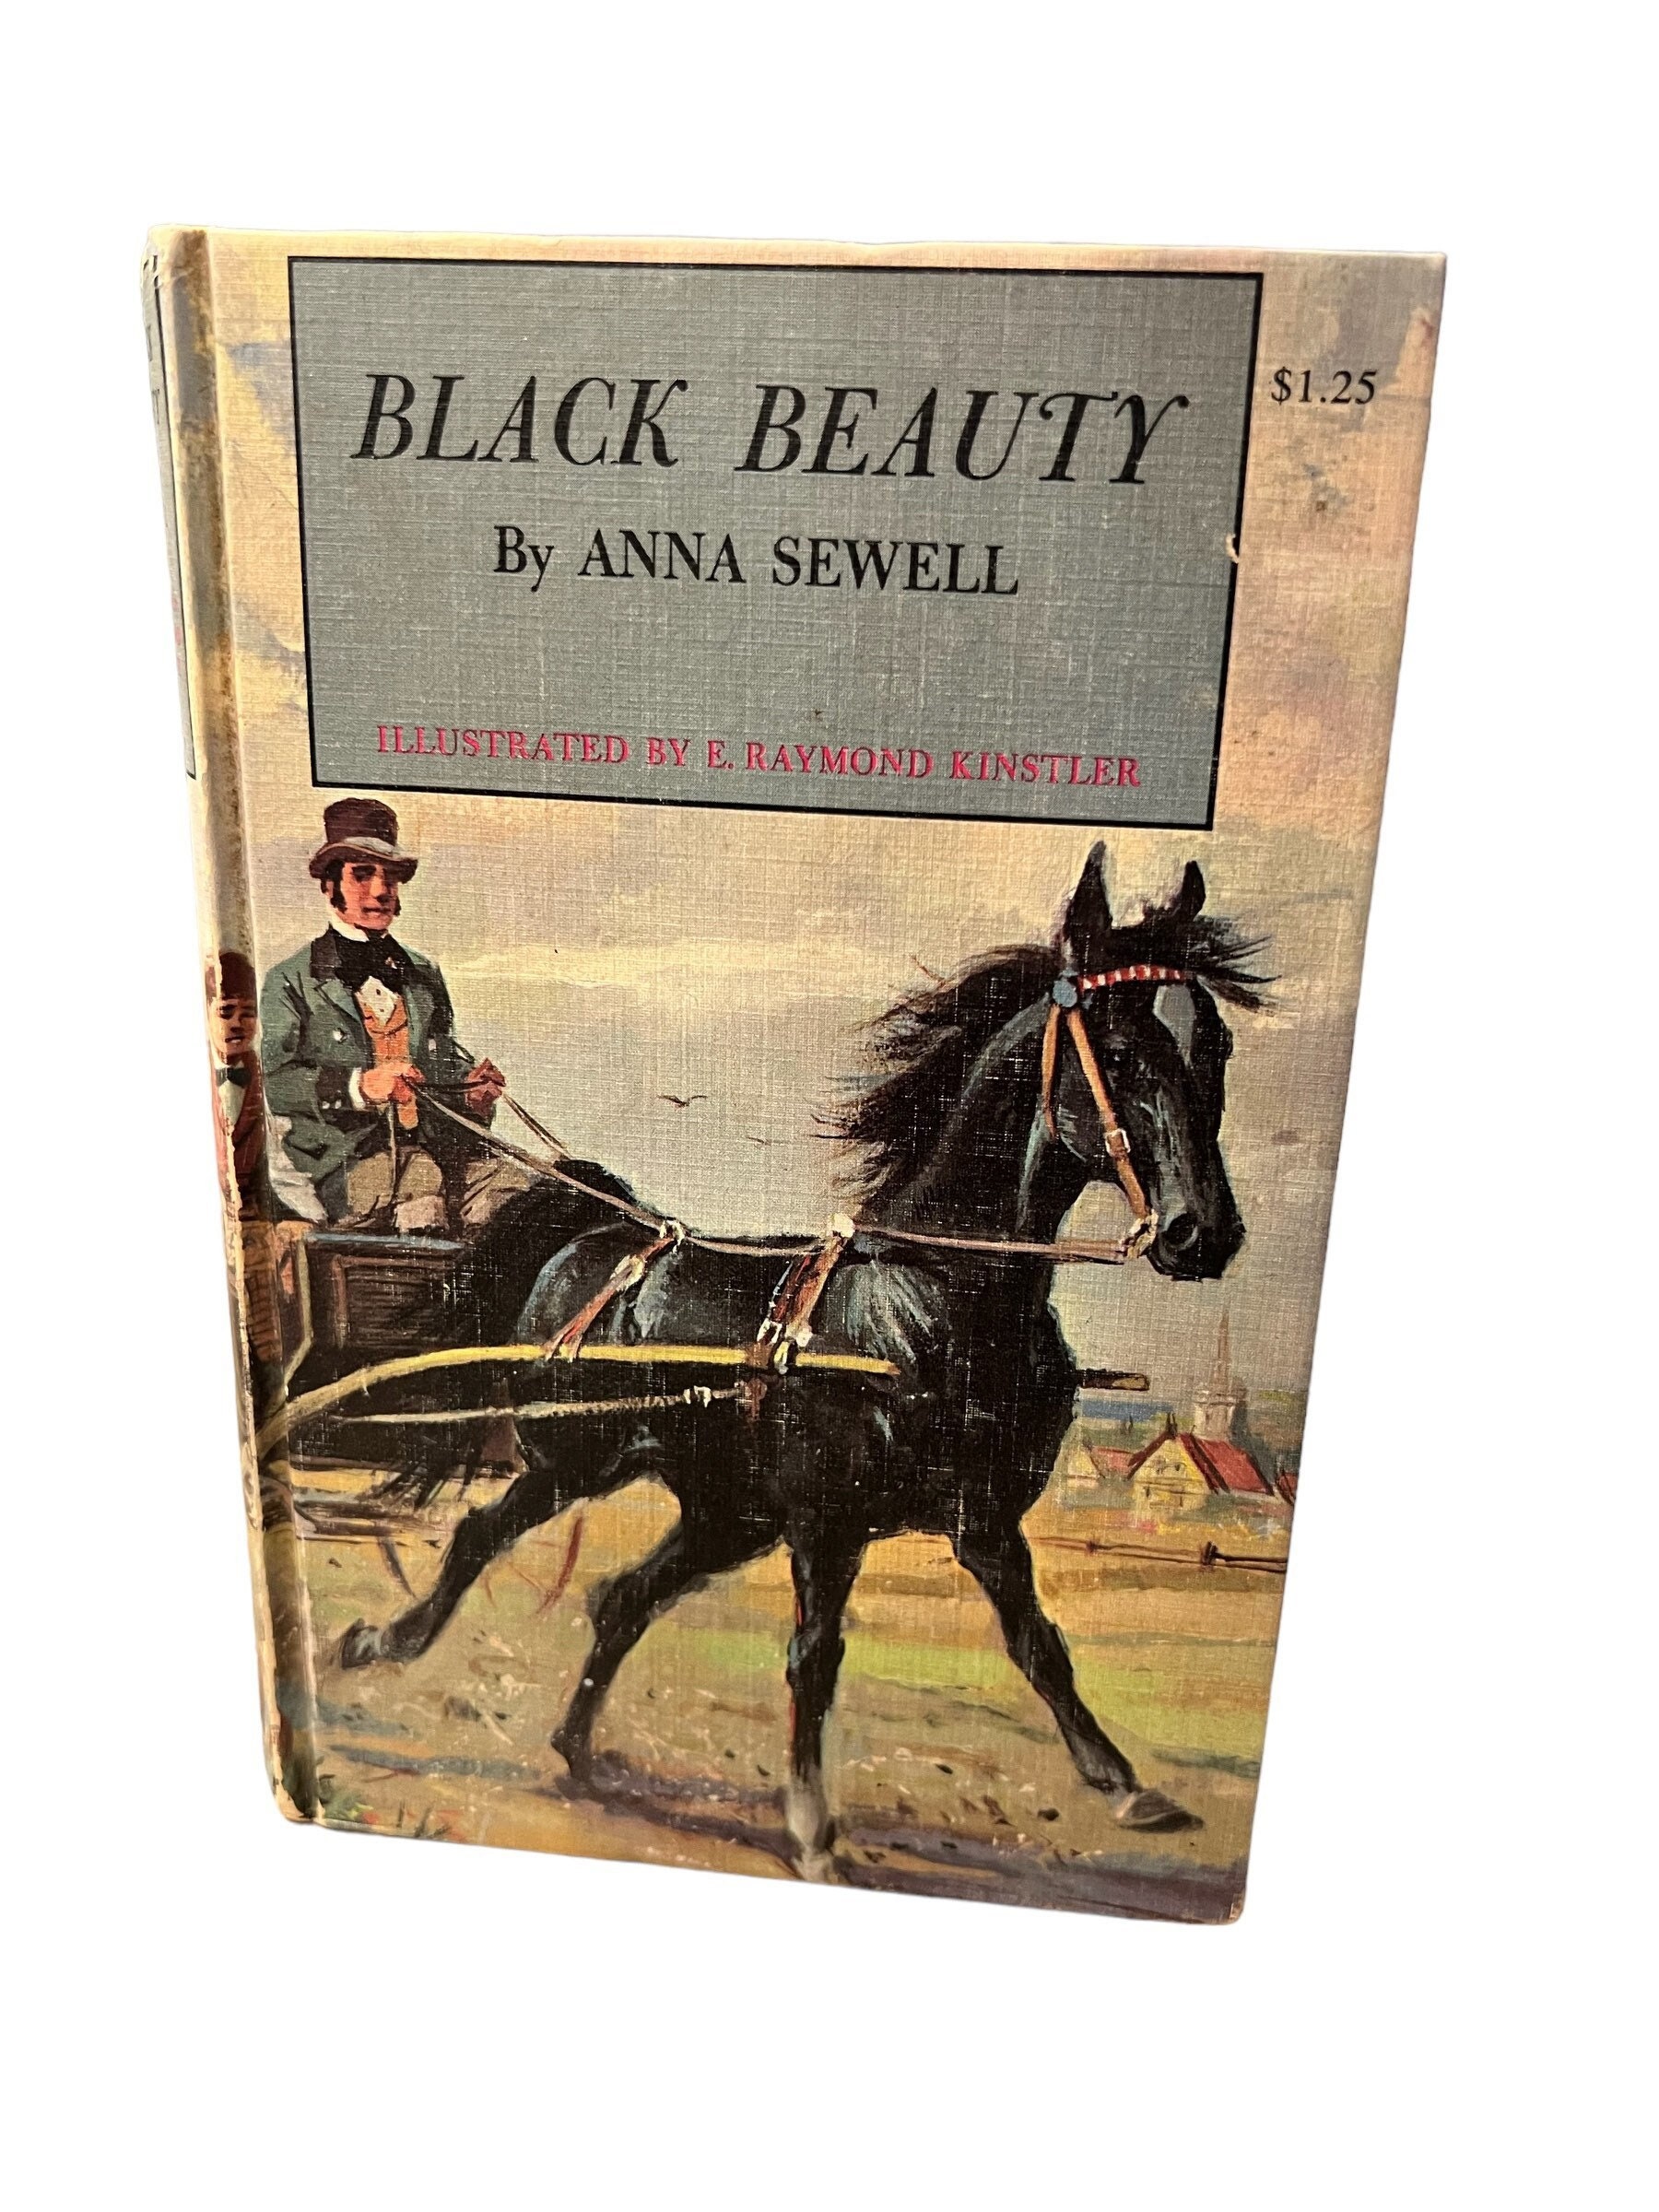 Black Beauty by Anna Sewell Copyright 1963 Black Beauty Book